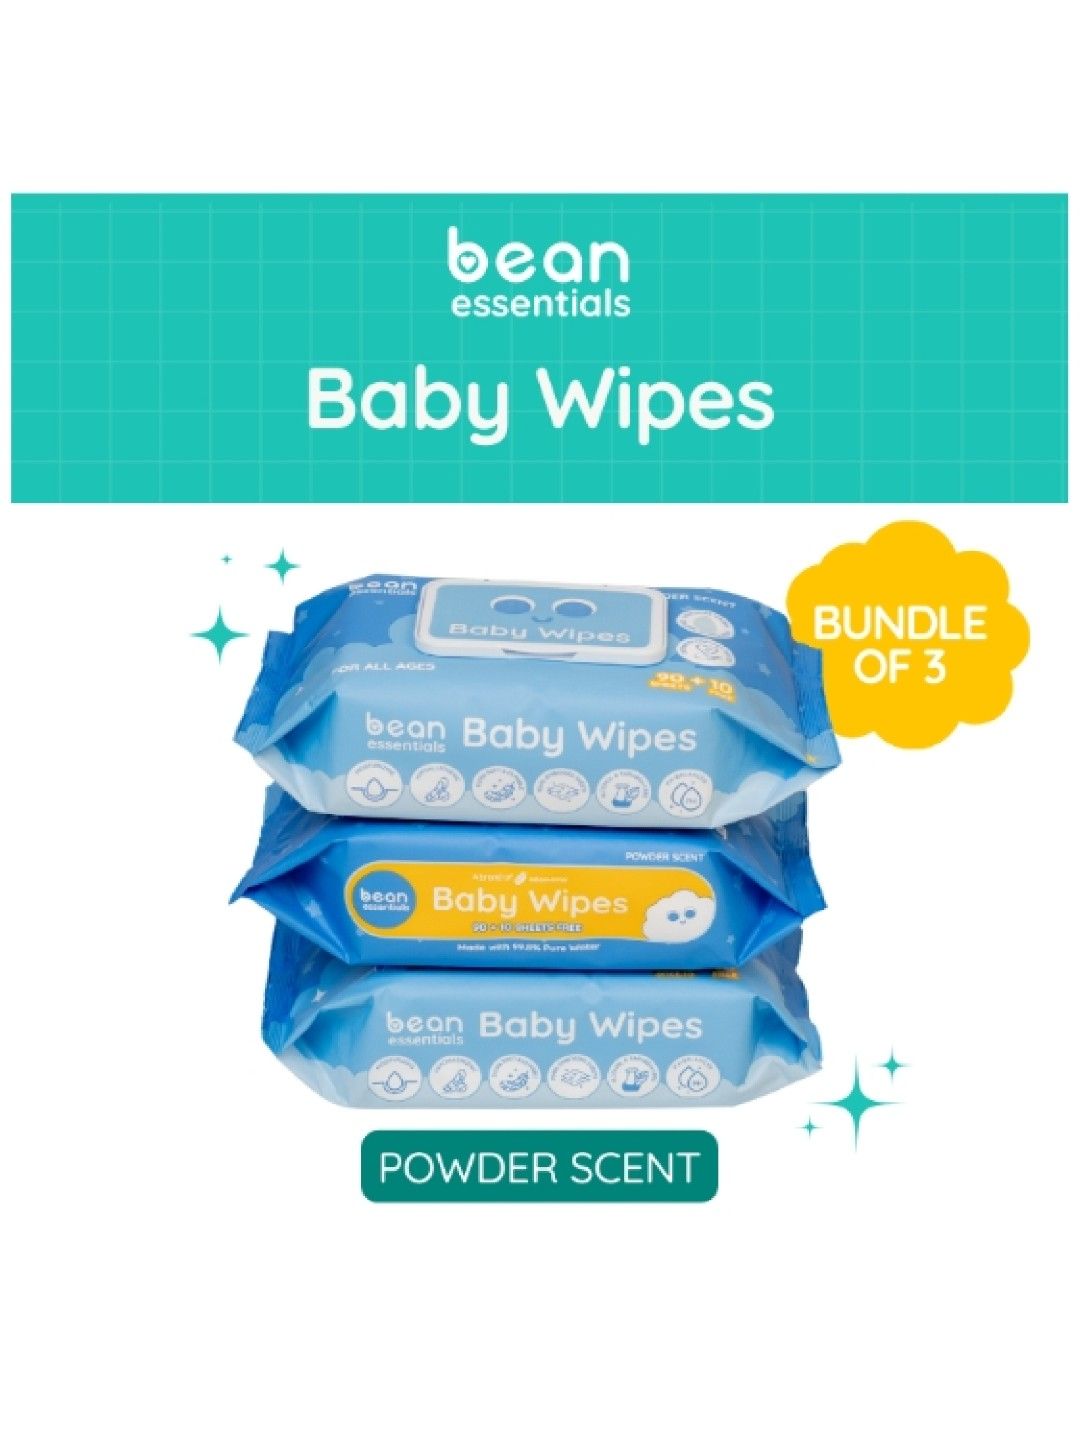 bean essentials [Bundle of 3] Baby Wipes Powder Scented 3 x 100 sheets (No Color- Image 1)